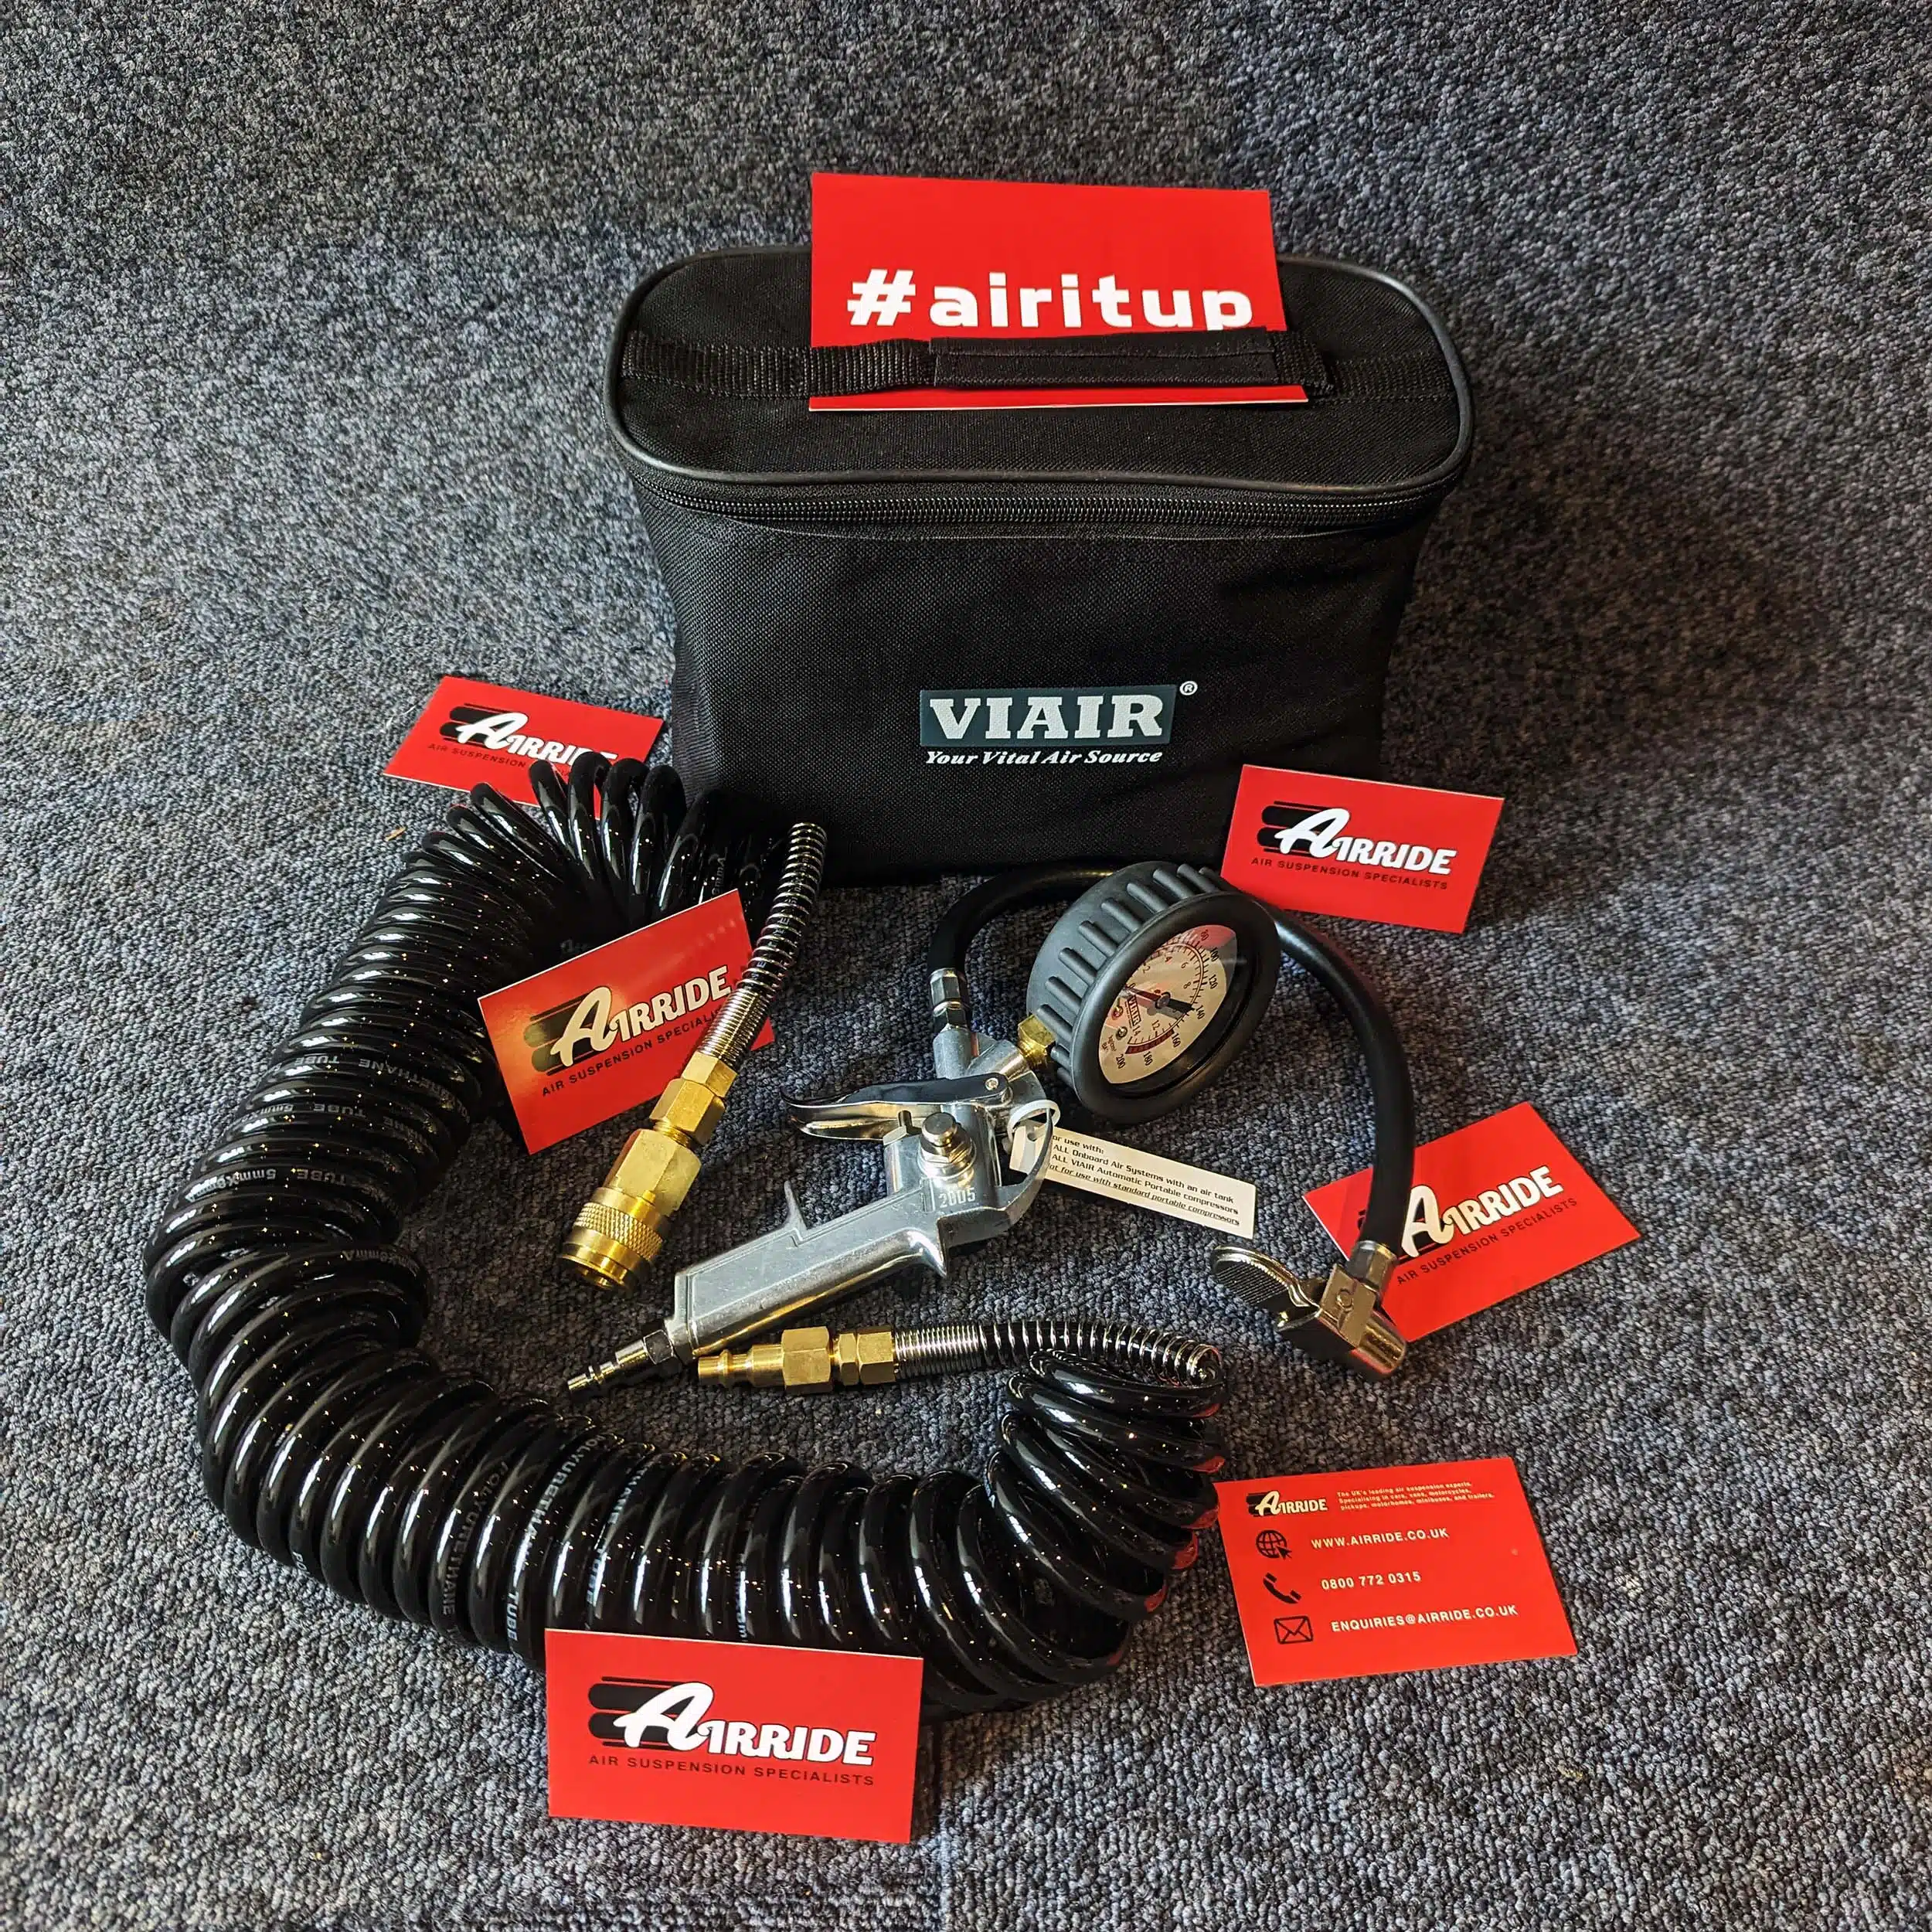 Viair mechanical tyre inflator kit laid out on blue background